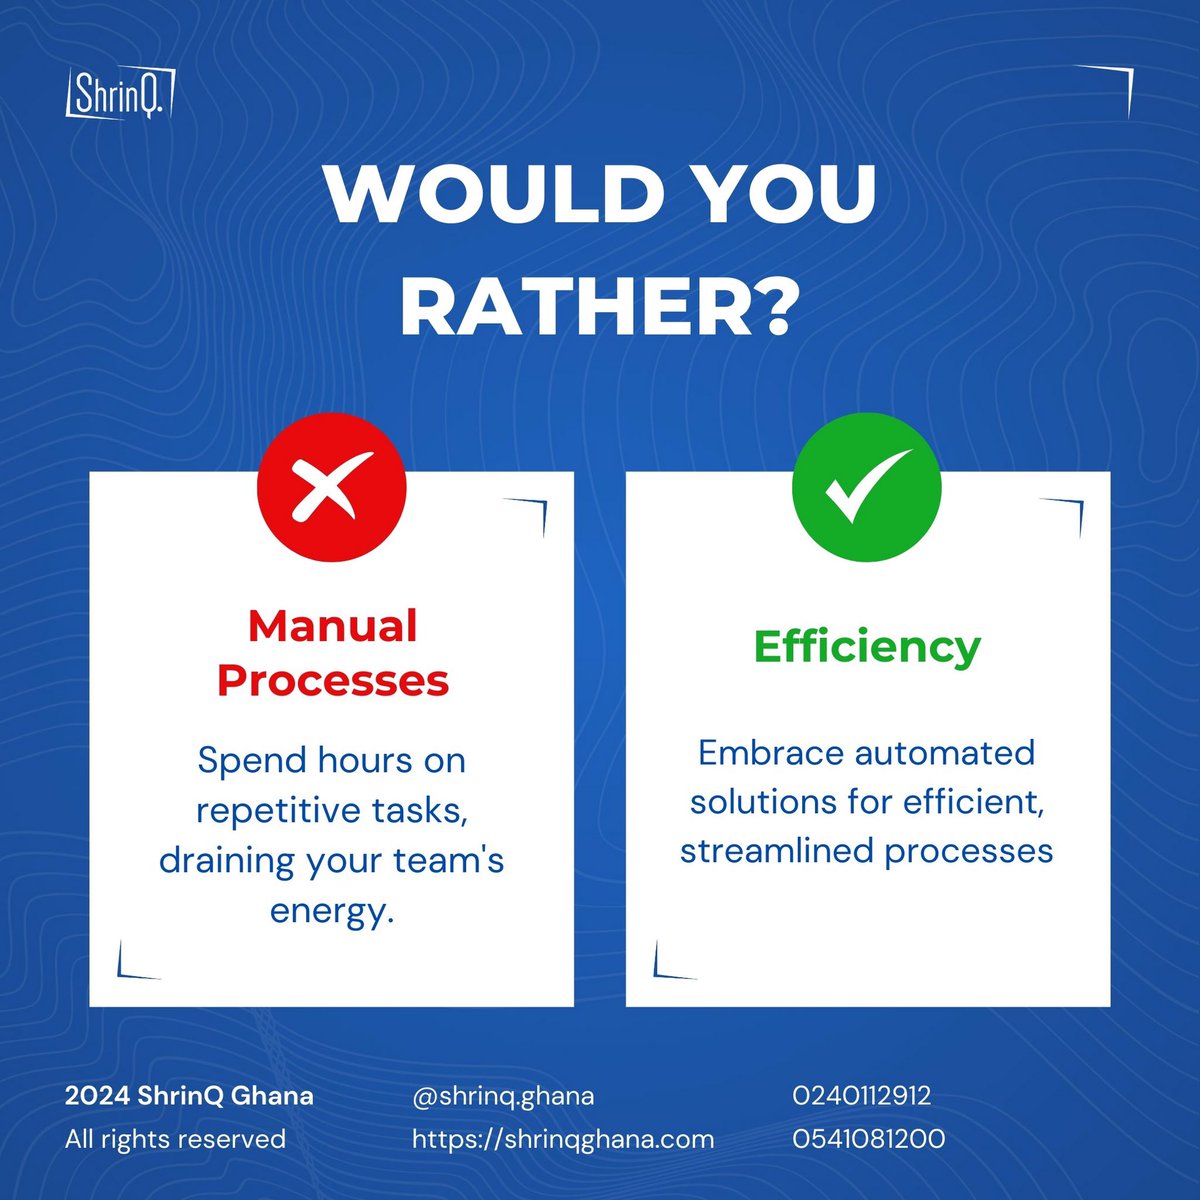 Would you rather spend your time on manual processes or let efficiency take the wheel with automation? The choice is yours!
Contact us today and enjoy automated solutions. 

Comment below with your pick.
#TechSolutions #AutomationVsManual #softwaredevelopment #Automatedsolutions